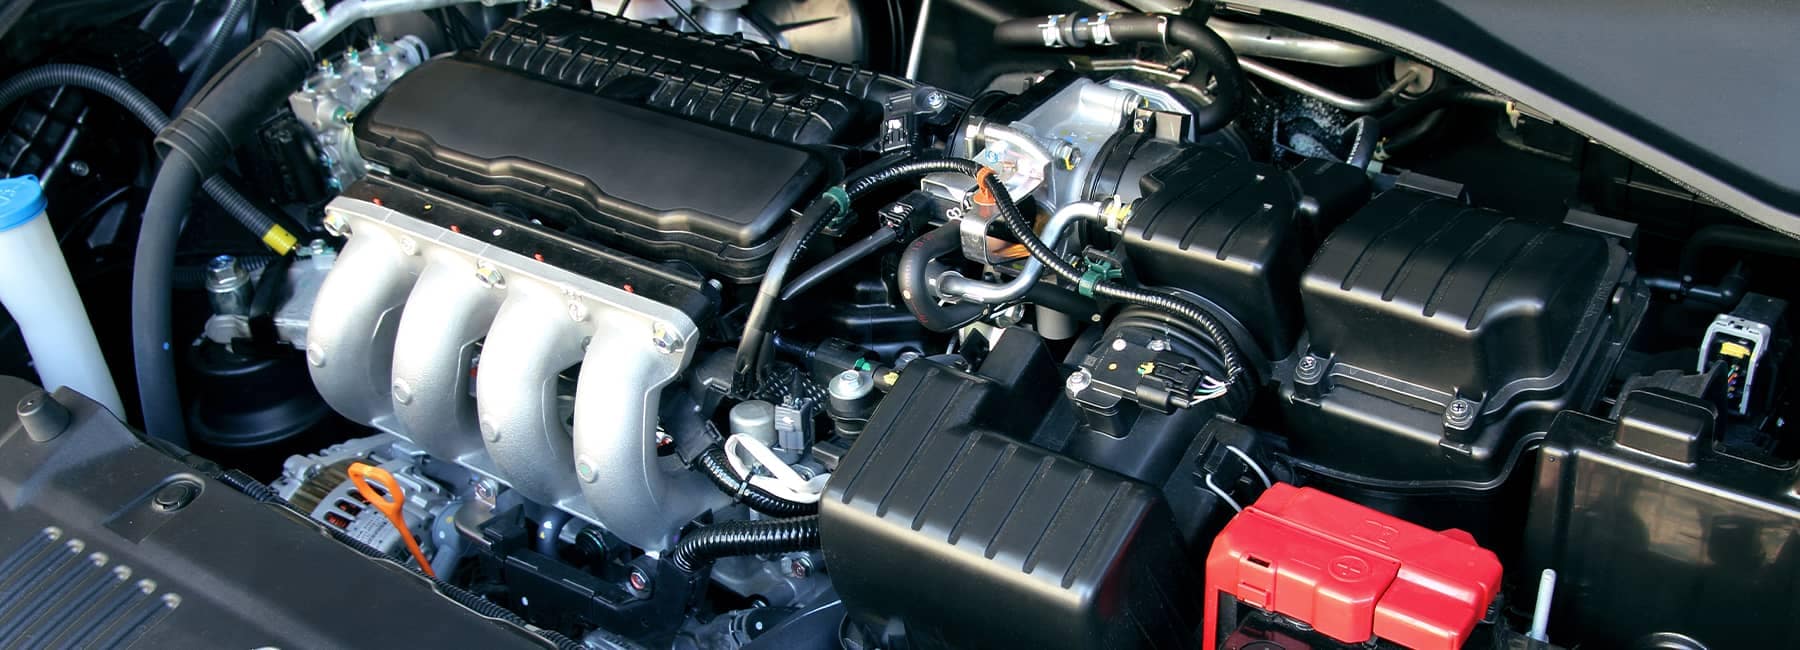 A photo of a V8 engine bay under the hood